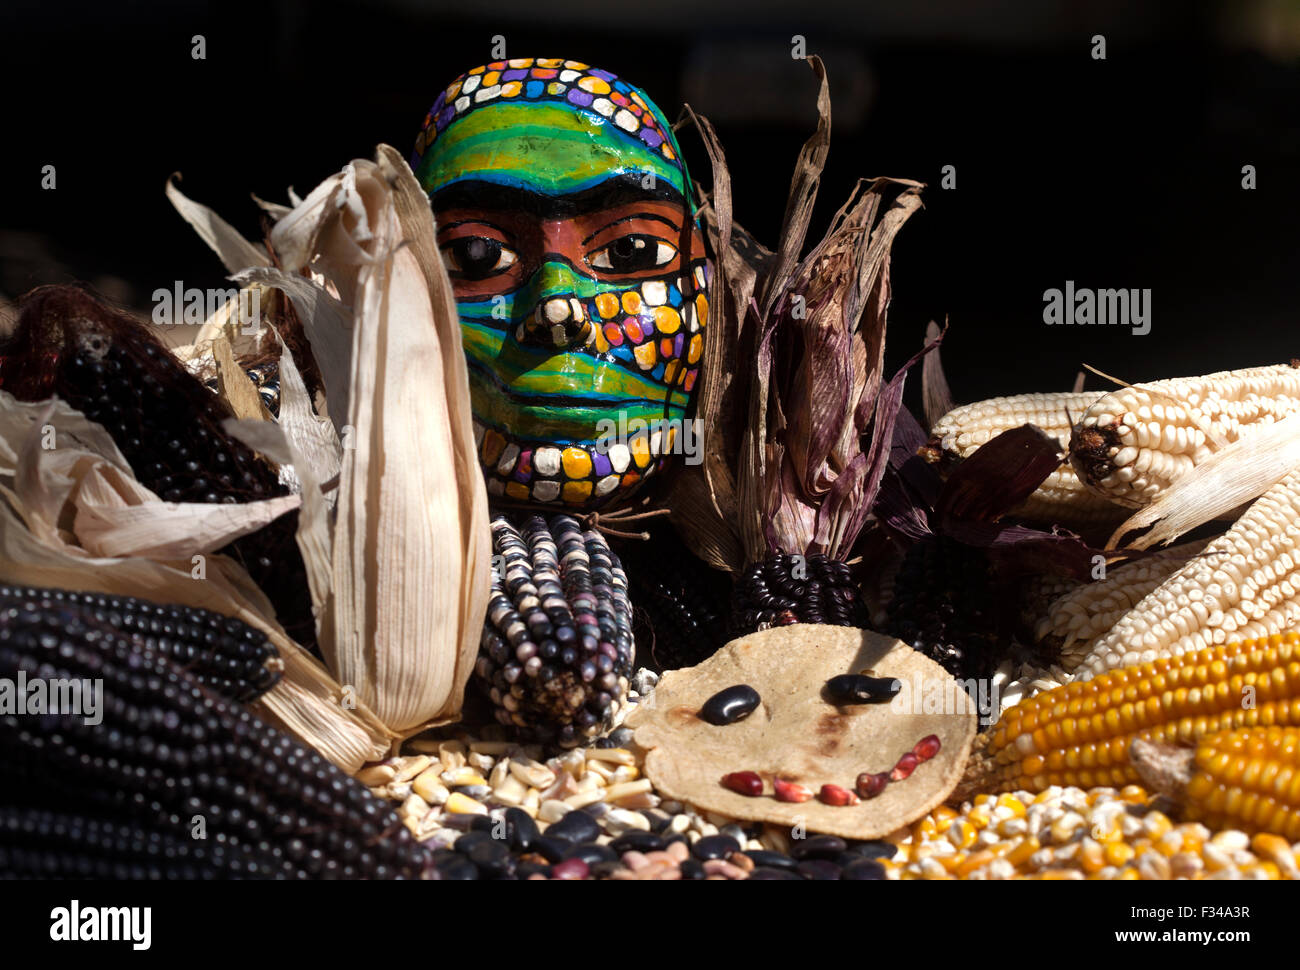 A colored mask decorates a table full of corn cobs in 'Tepetlixpa Seed Bank', created by Tomas Villanueva Buendia 'Tomaicito' to protect and rescue the original varieties of Mexican corn Stock Photo